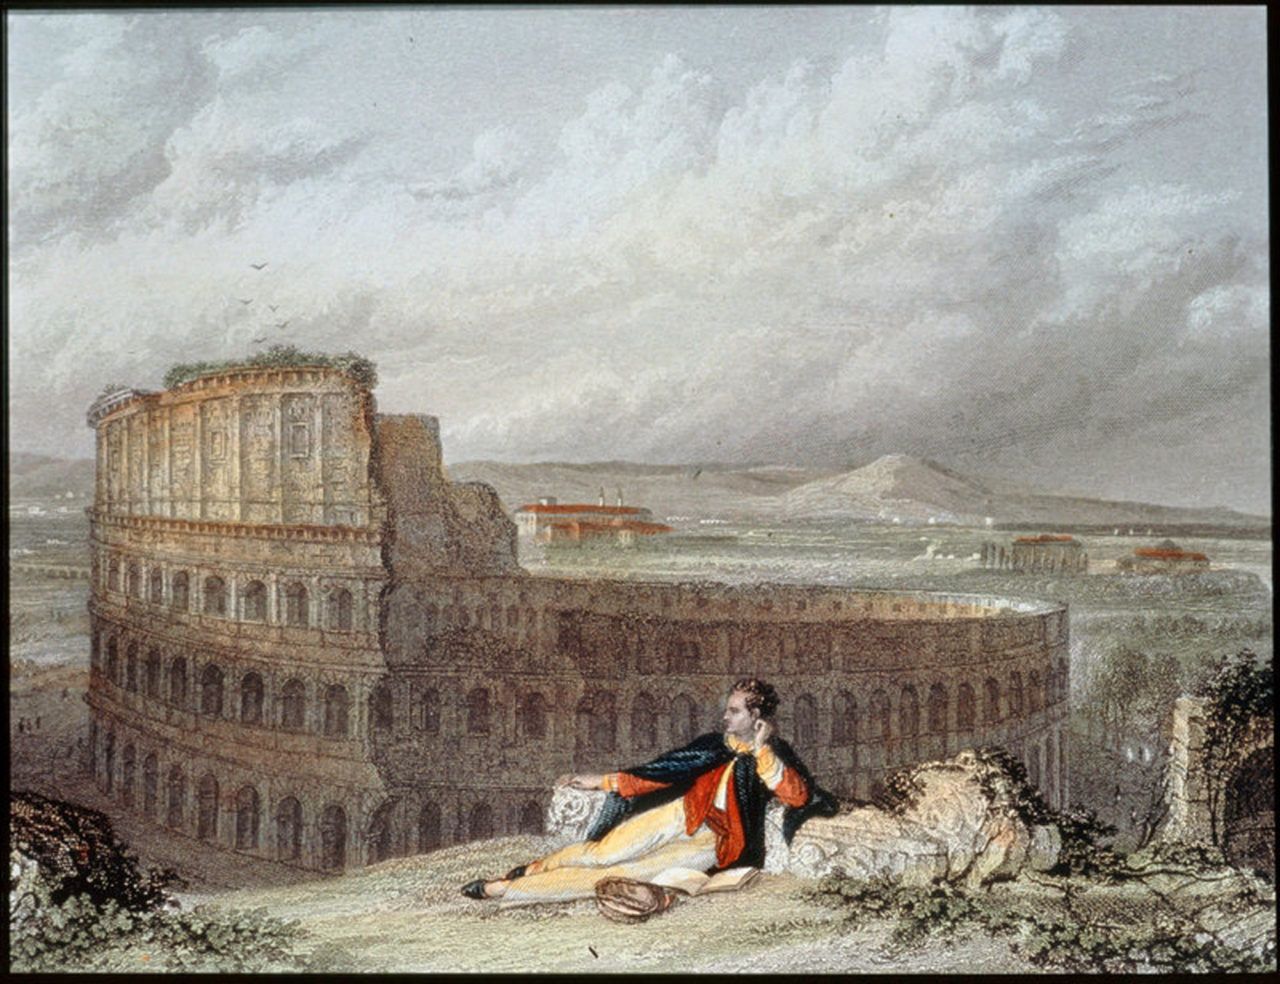 Lord George Byron contemplating the Colosseum in Rome by Arthur Willmore